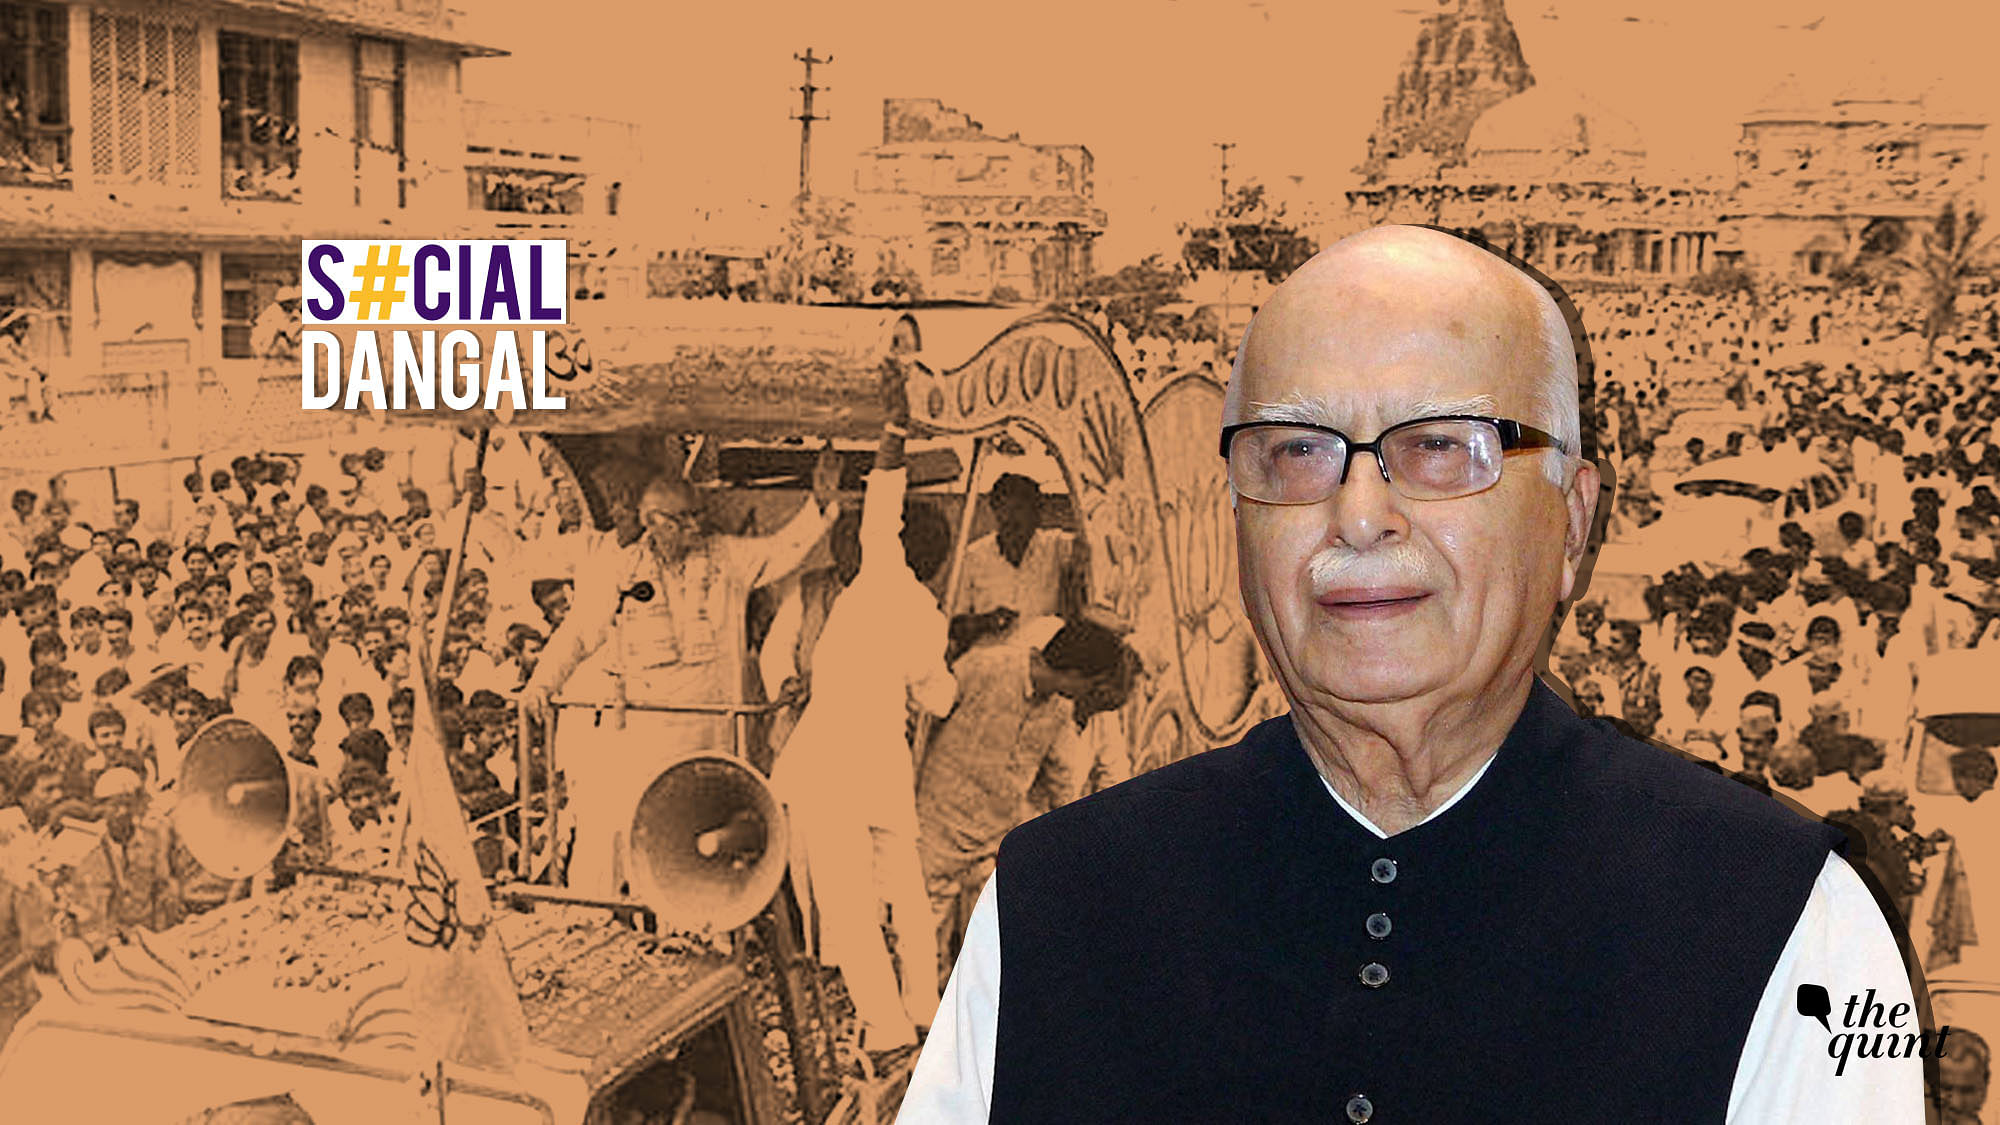 LK Advani led the Rath Yatra in the 1990s that led to the demolition of Babri Masjid.&nbsp;